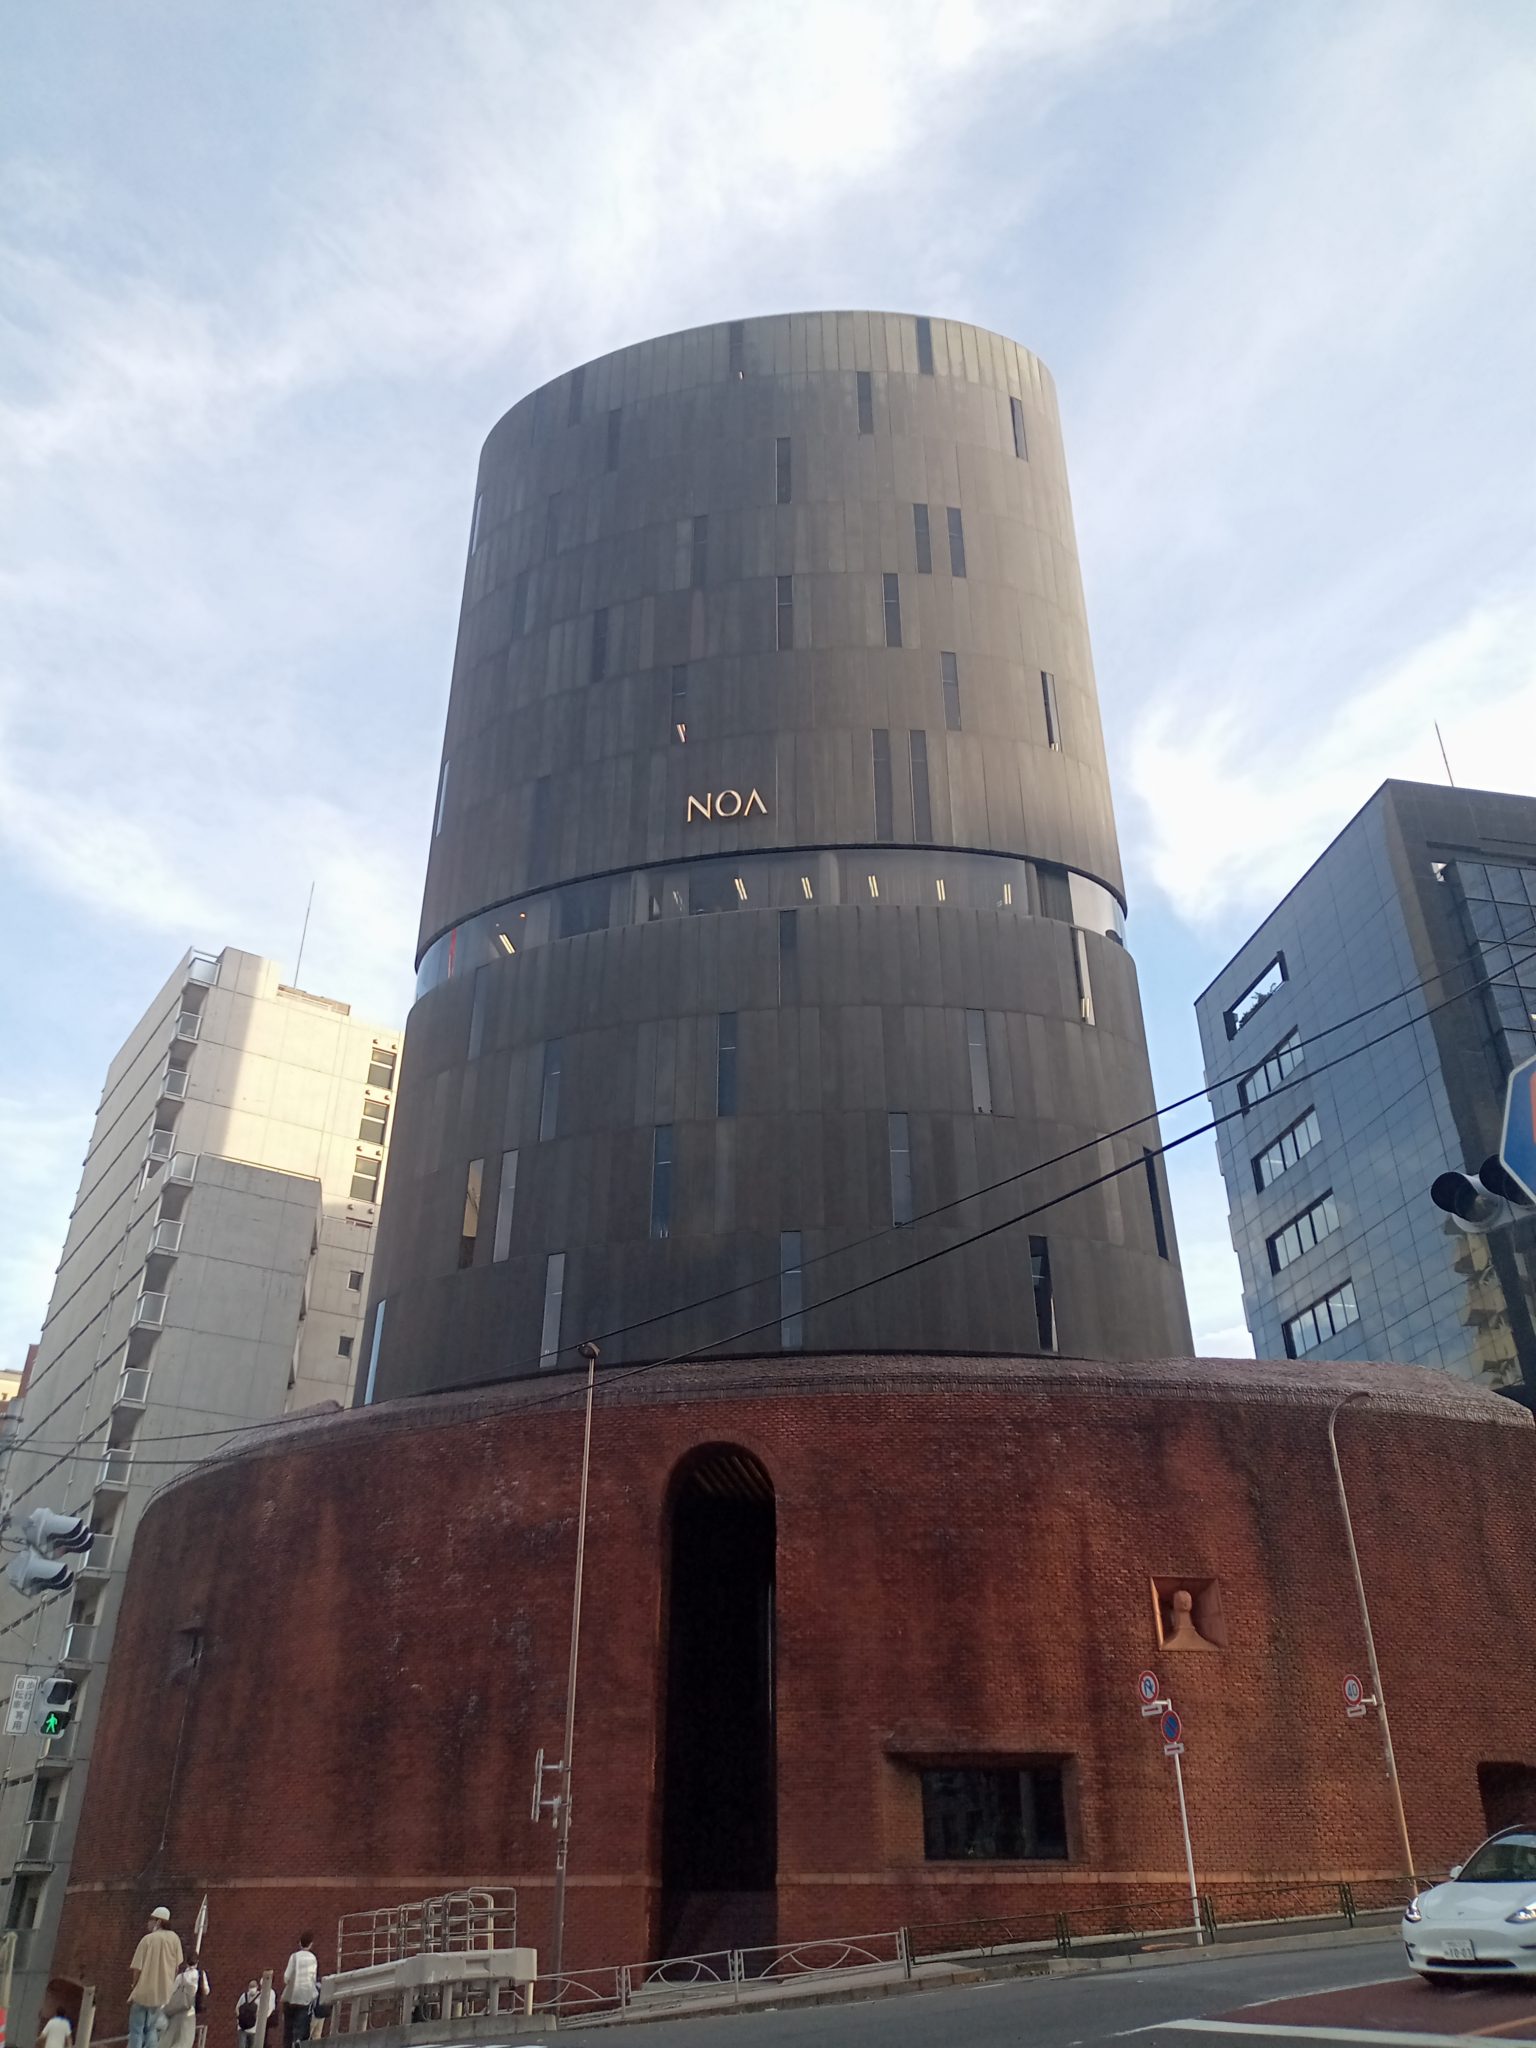 architectural tour of tokyo